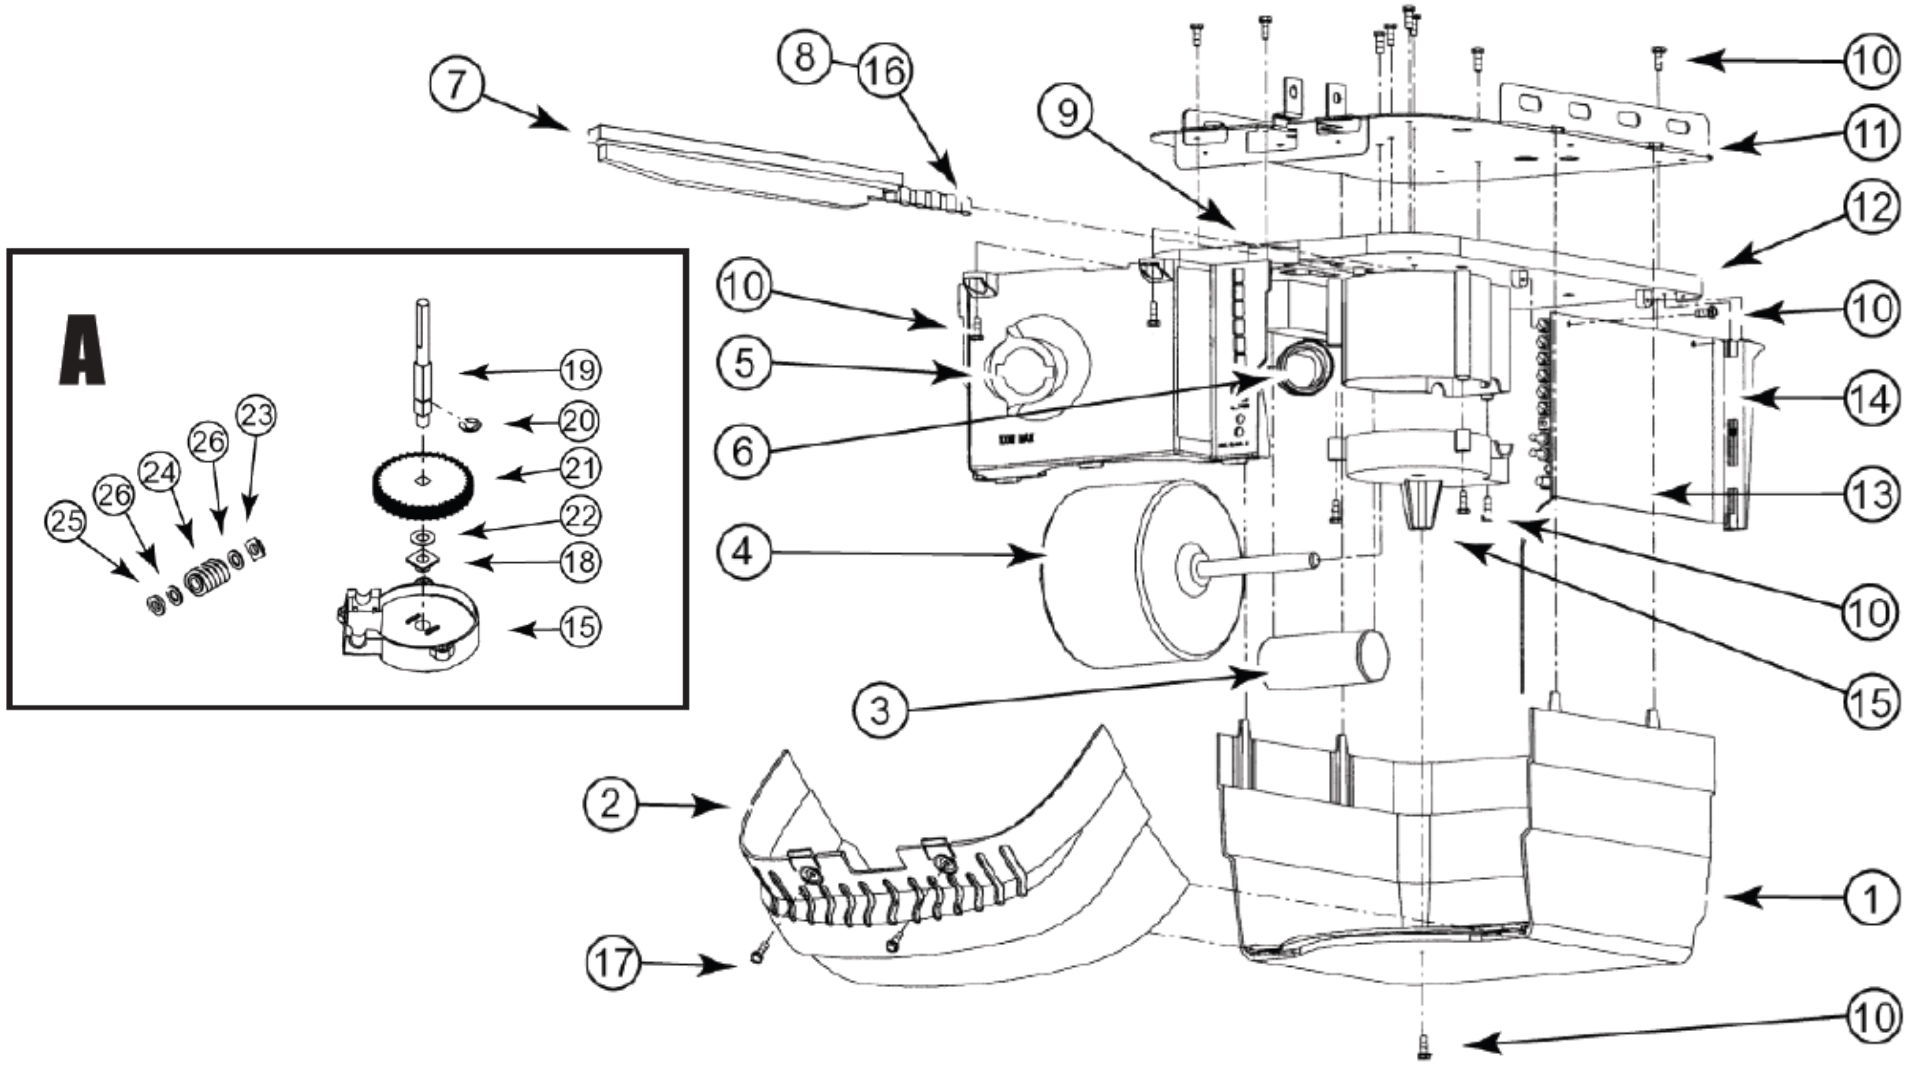 Genie ChainGlide diagram of replacement parts - Powerhead